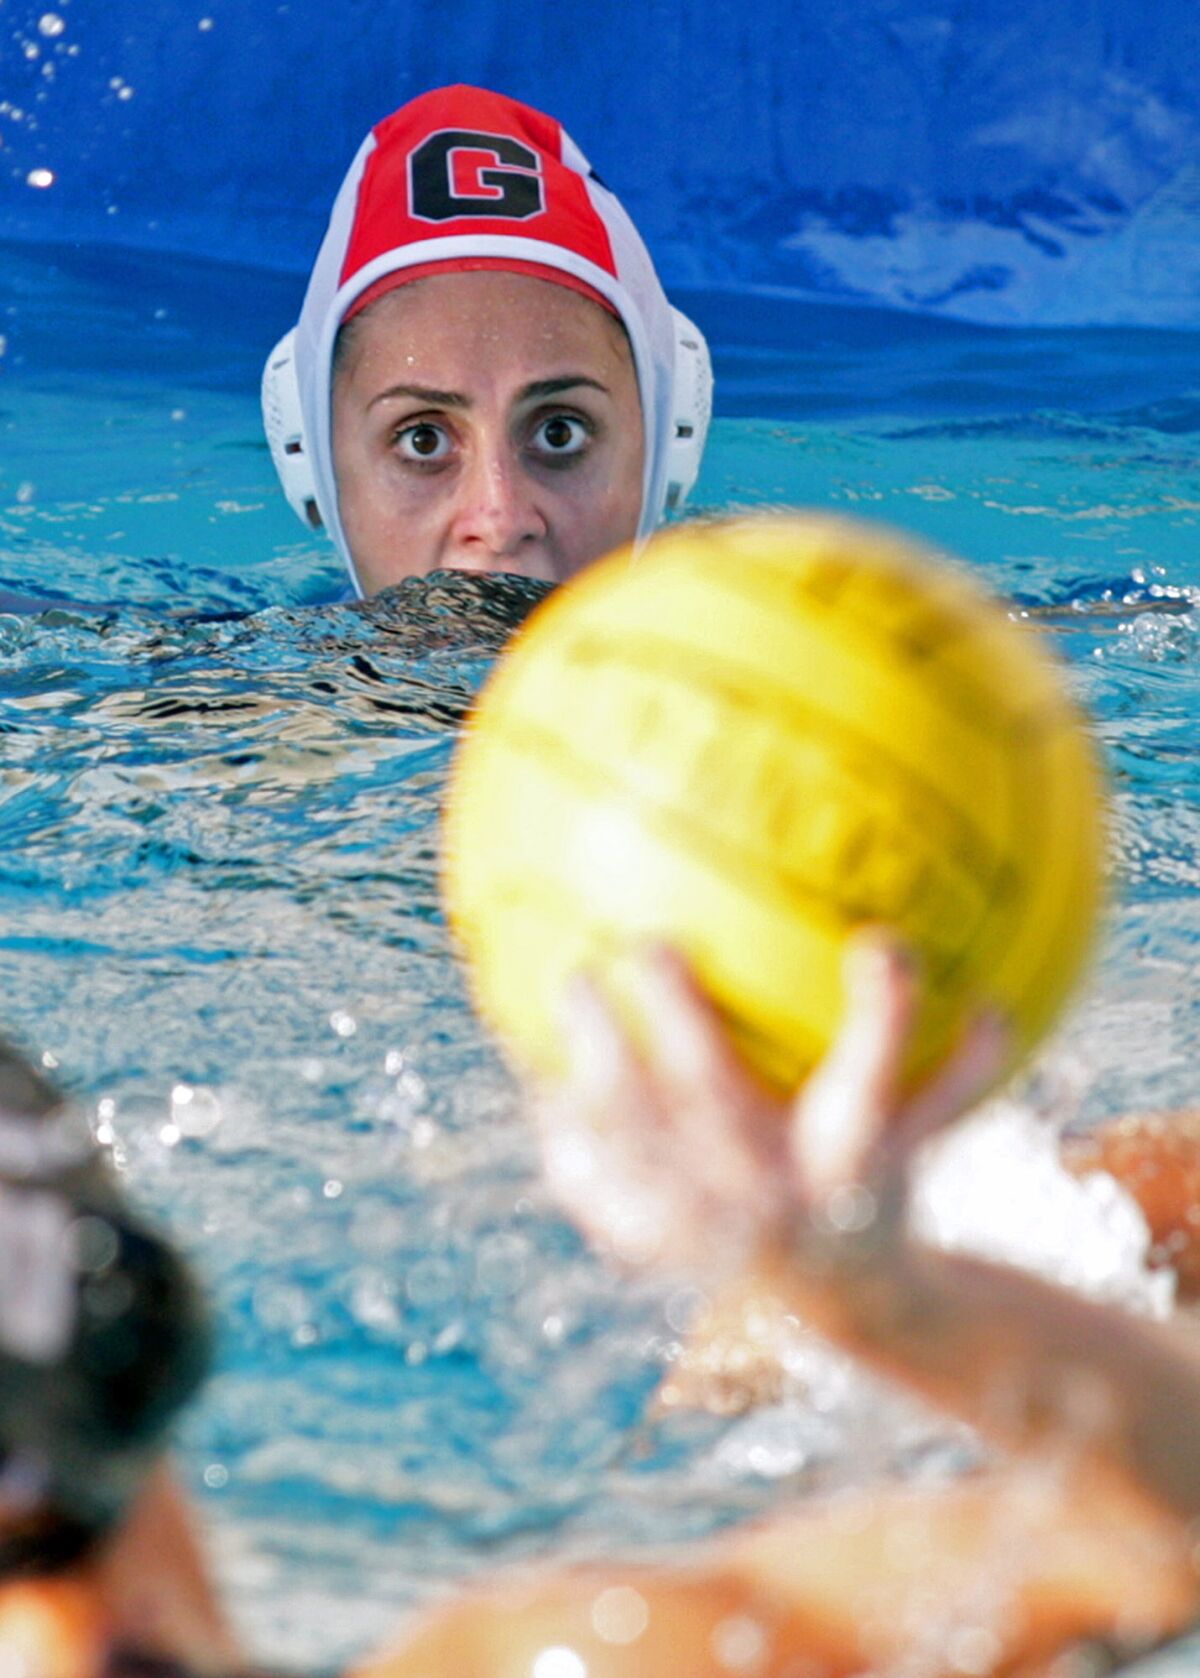 Glendale High girls' water polo goalie Shushanik Gabrielyan prepares to block a shot in a game against Hoover High. Gabrielyan, who graduated in 2015, has filed a lawsuit against the Glendale Unified School District, claiming that water polo practices were "extremely intense and egregiously inappropriate."